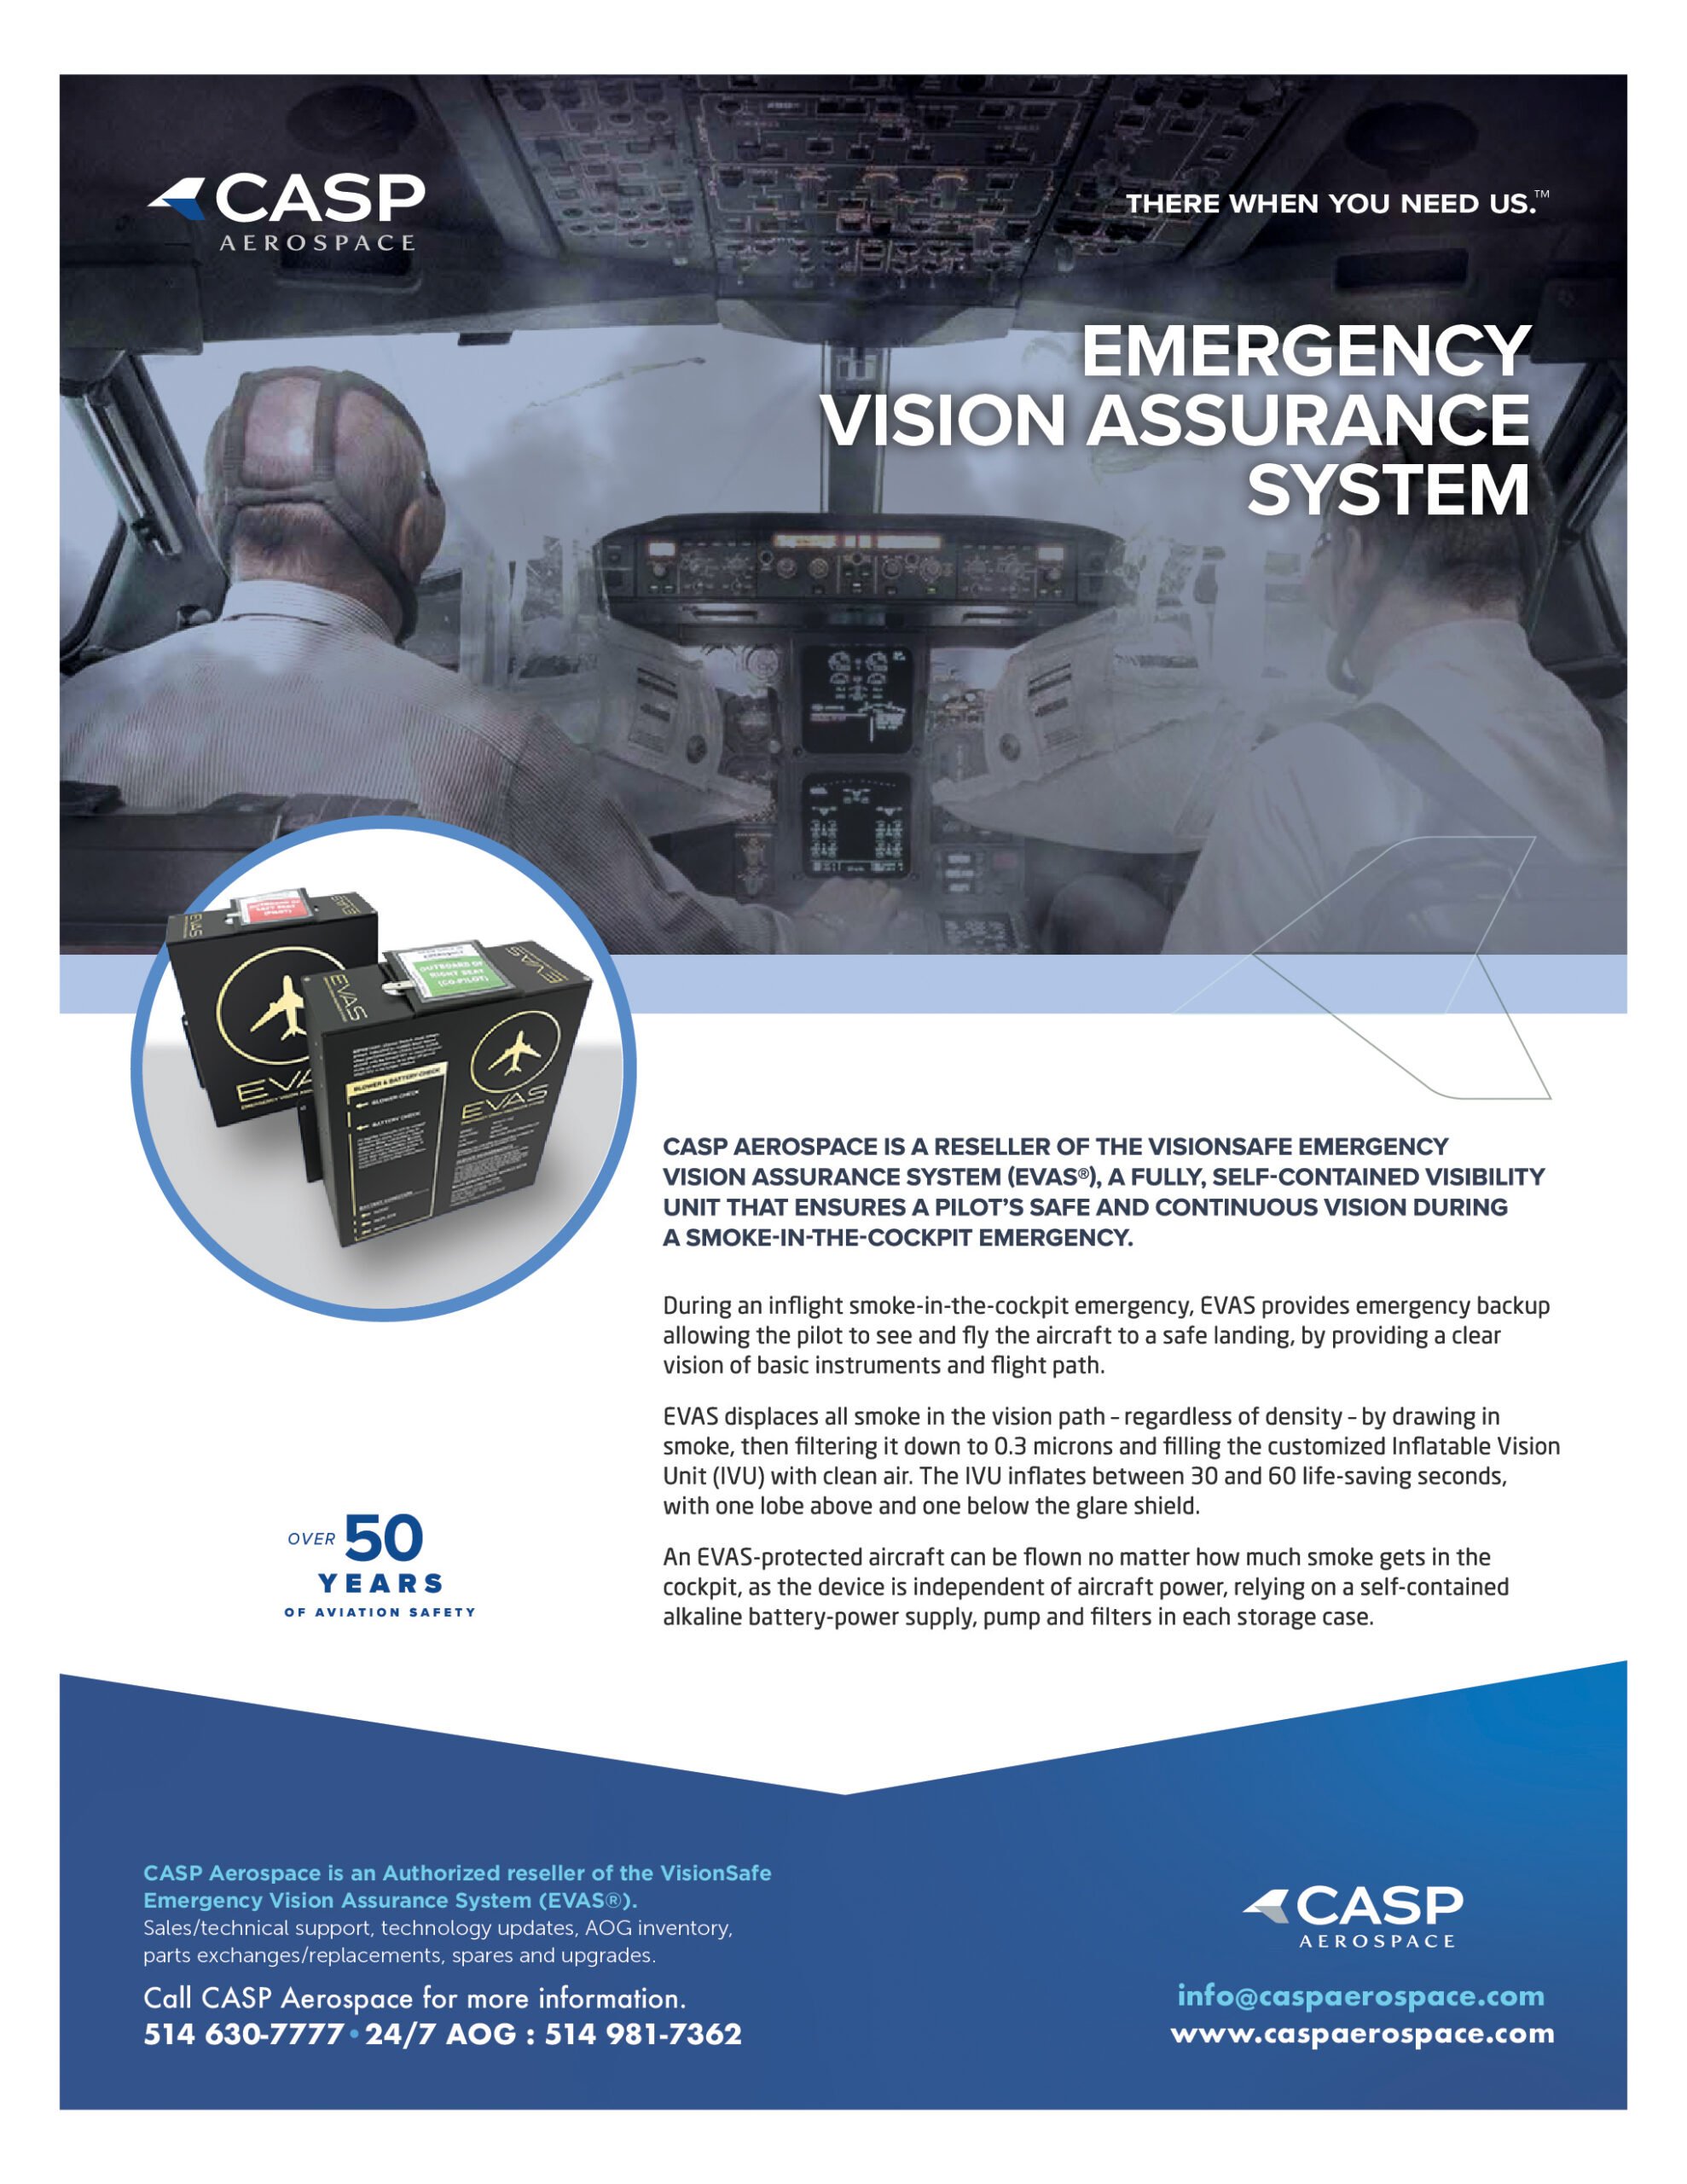 CASP Aerospace signs reseller agreement with VisionSafe.